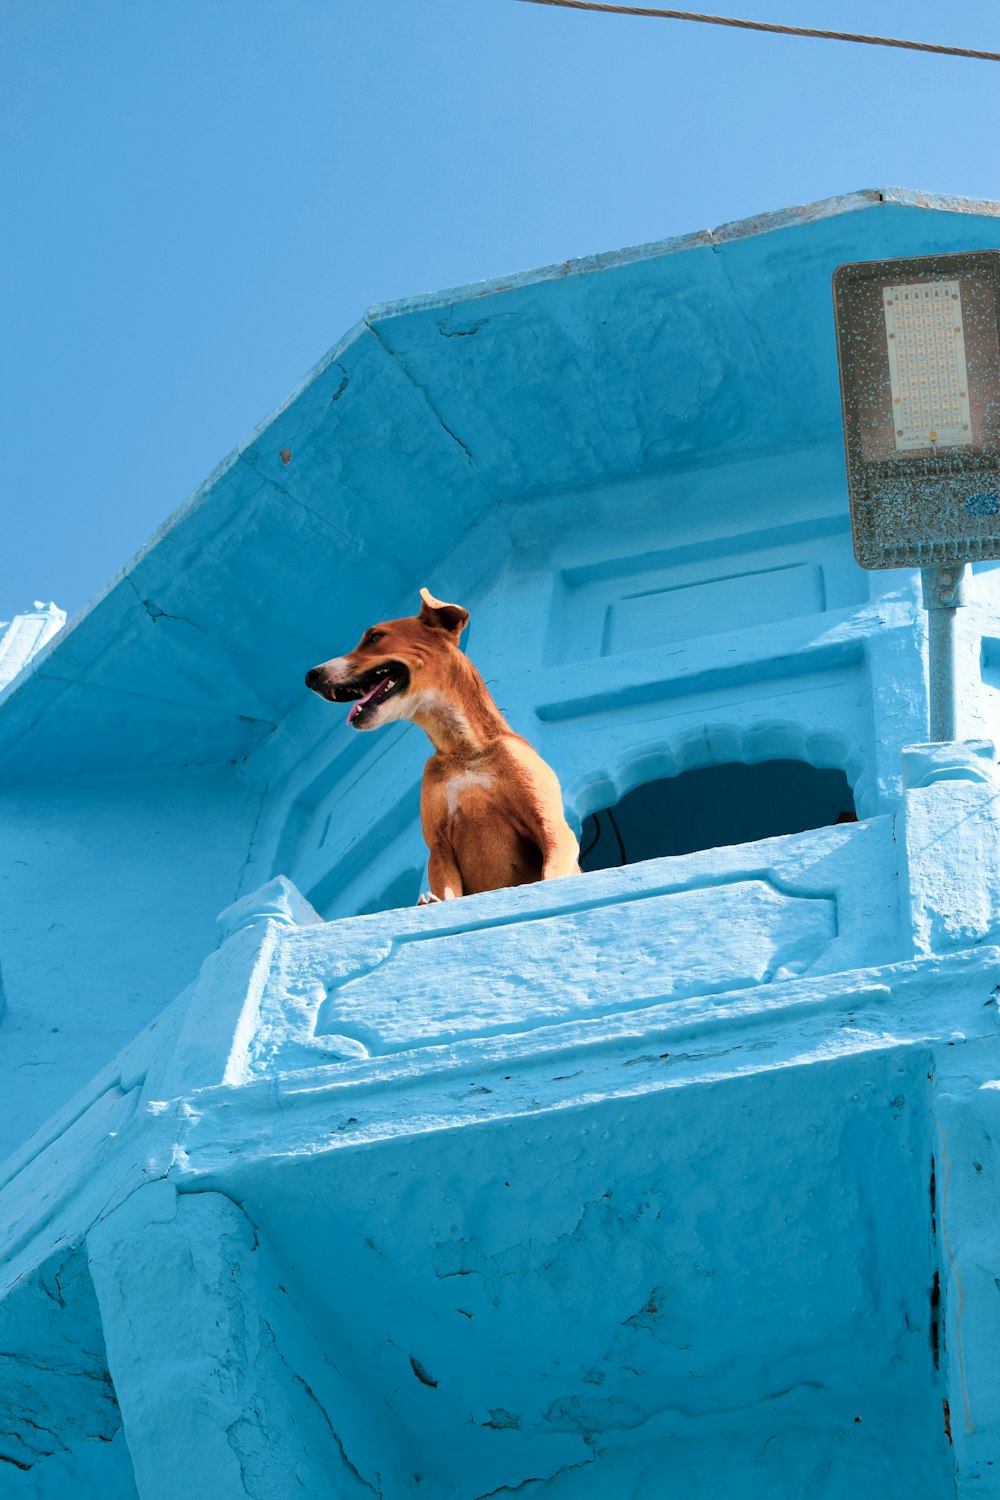 a dog is sitting in a blue boat